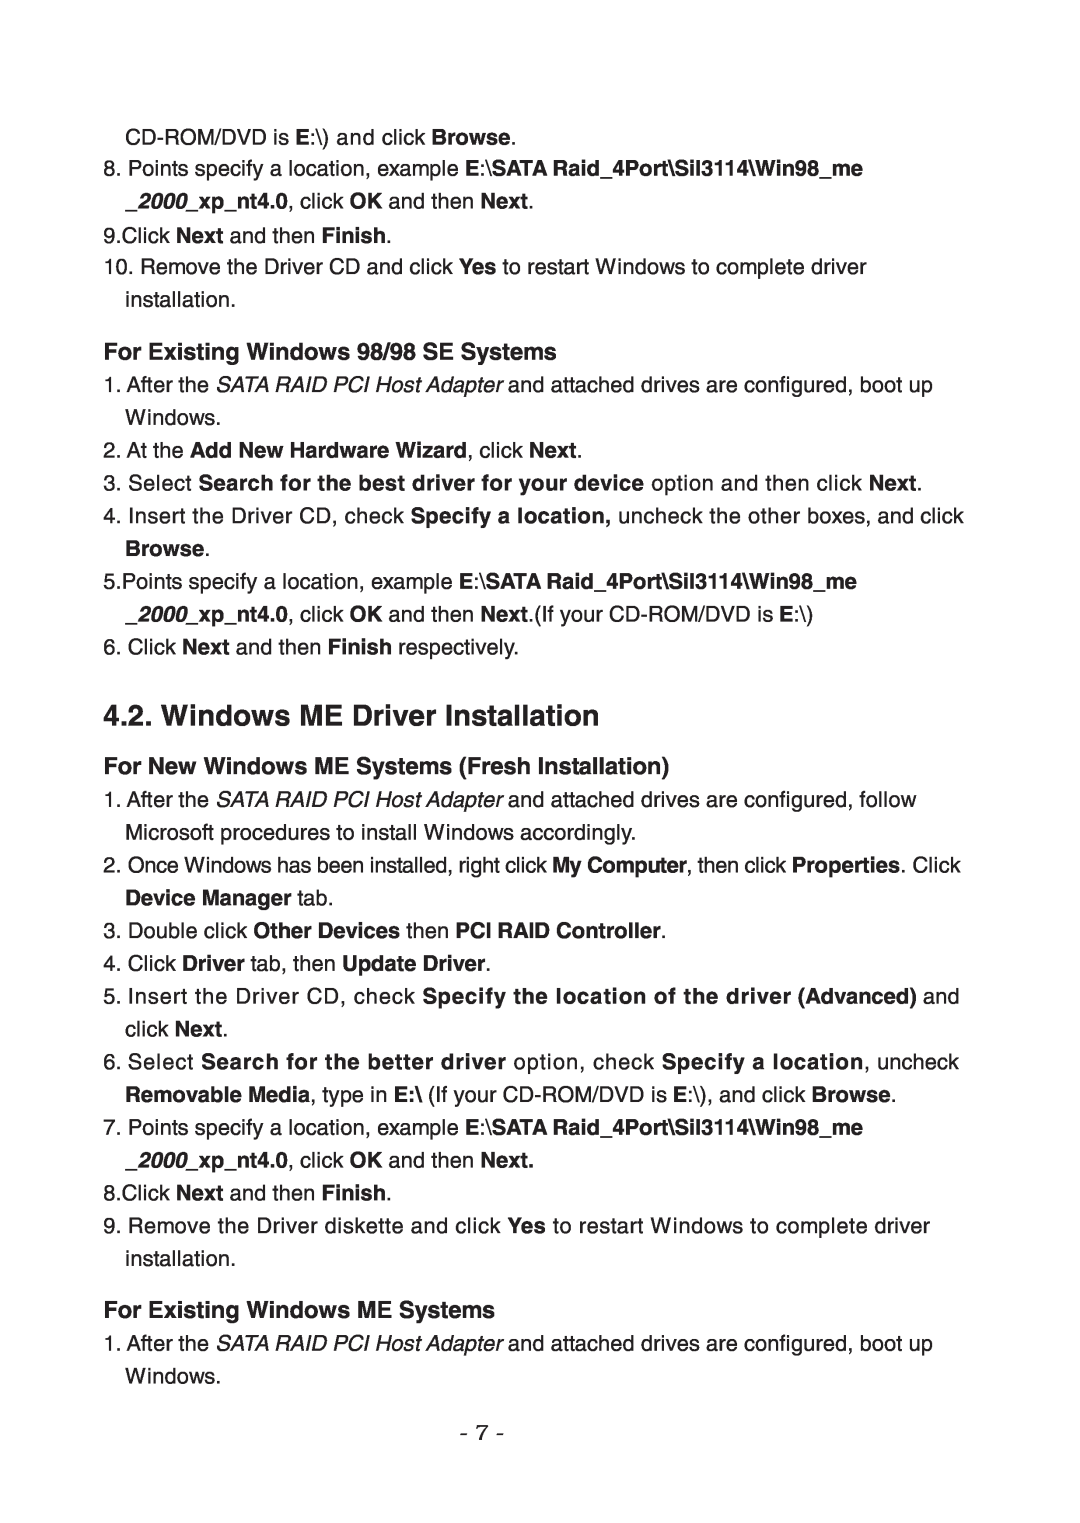 Lindy 70541 Windows ME Driver Installation, For Existing Windows 98/98 SE Systems, For Existing Windows ME Systems, Browse 